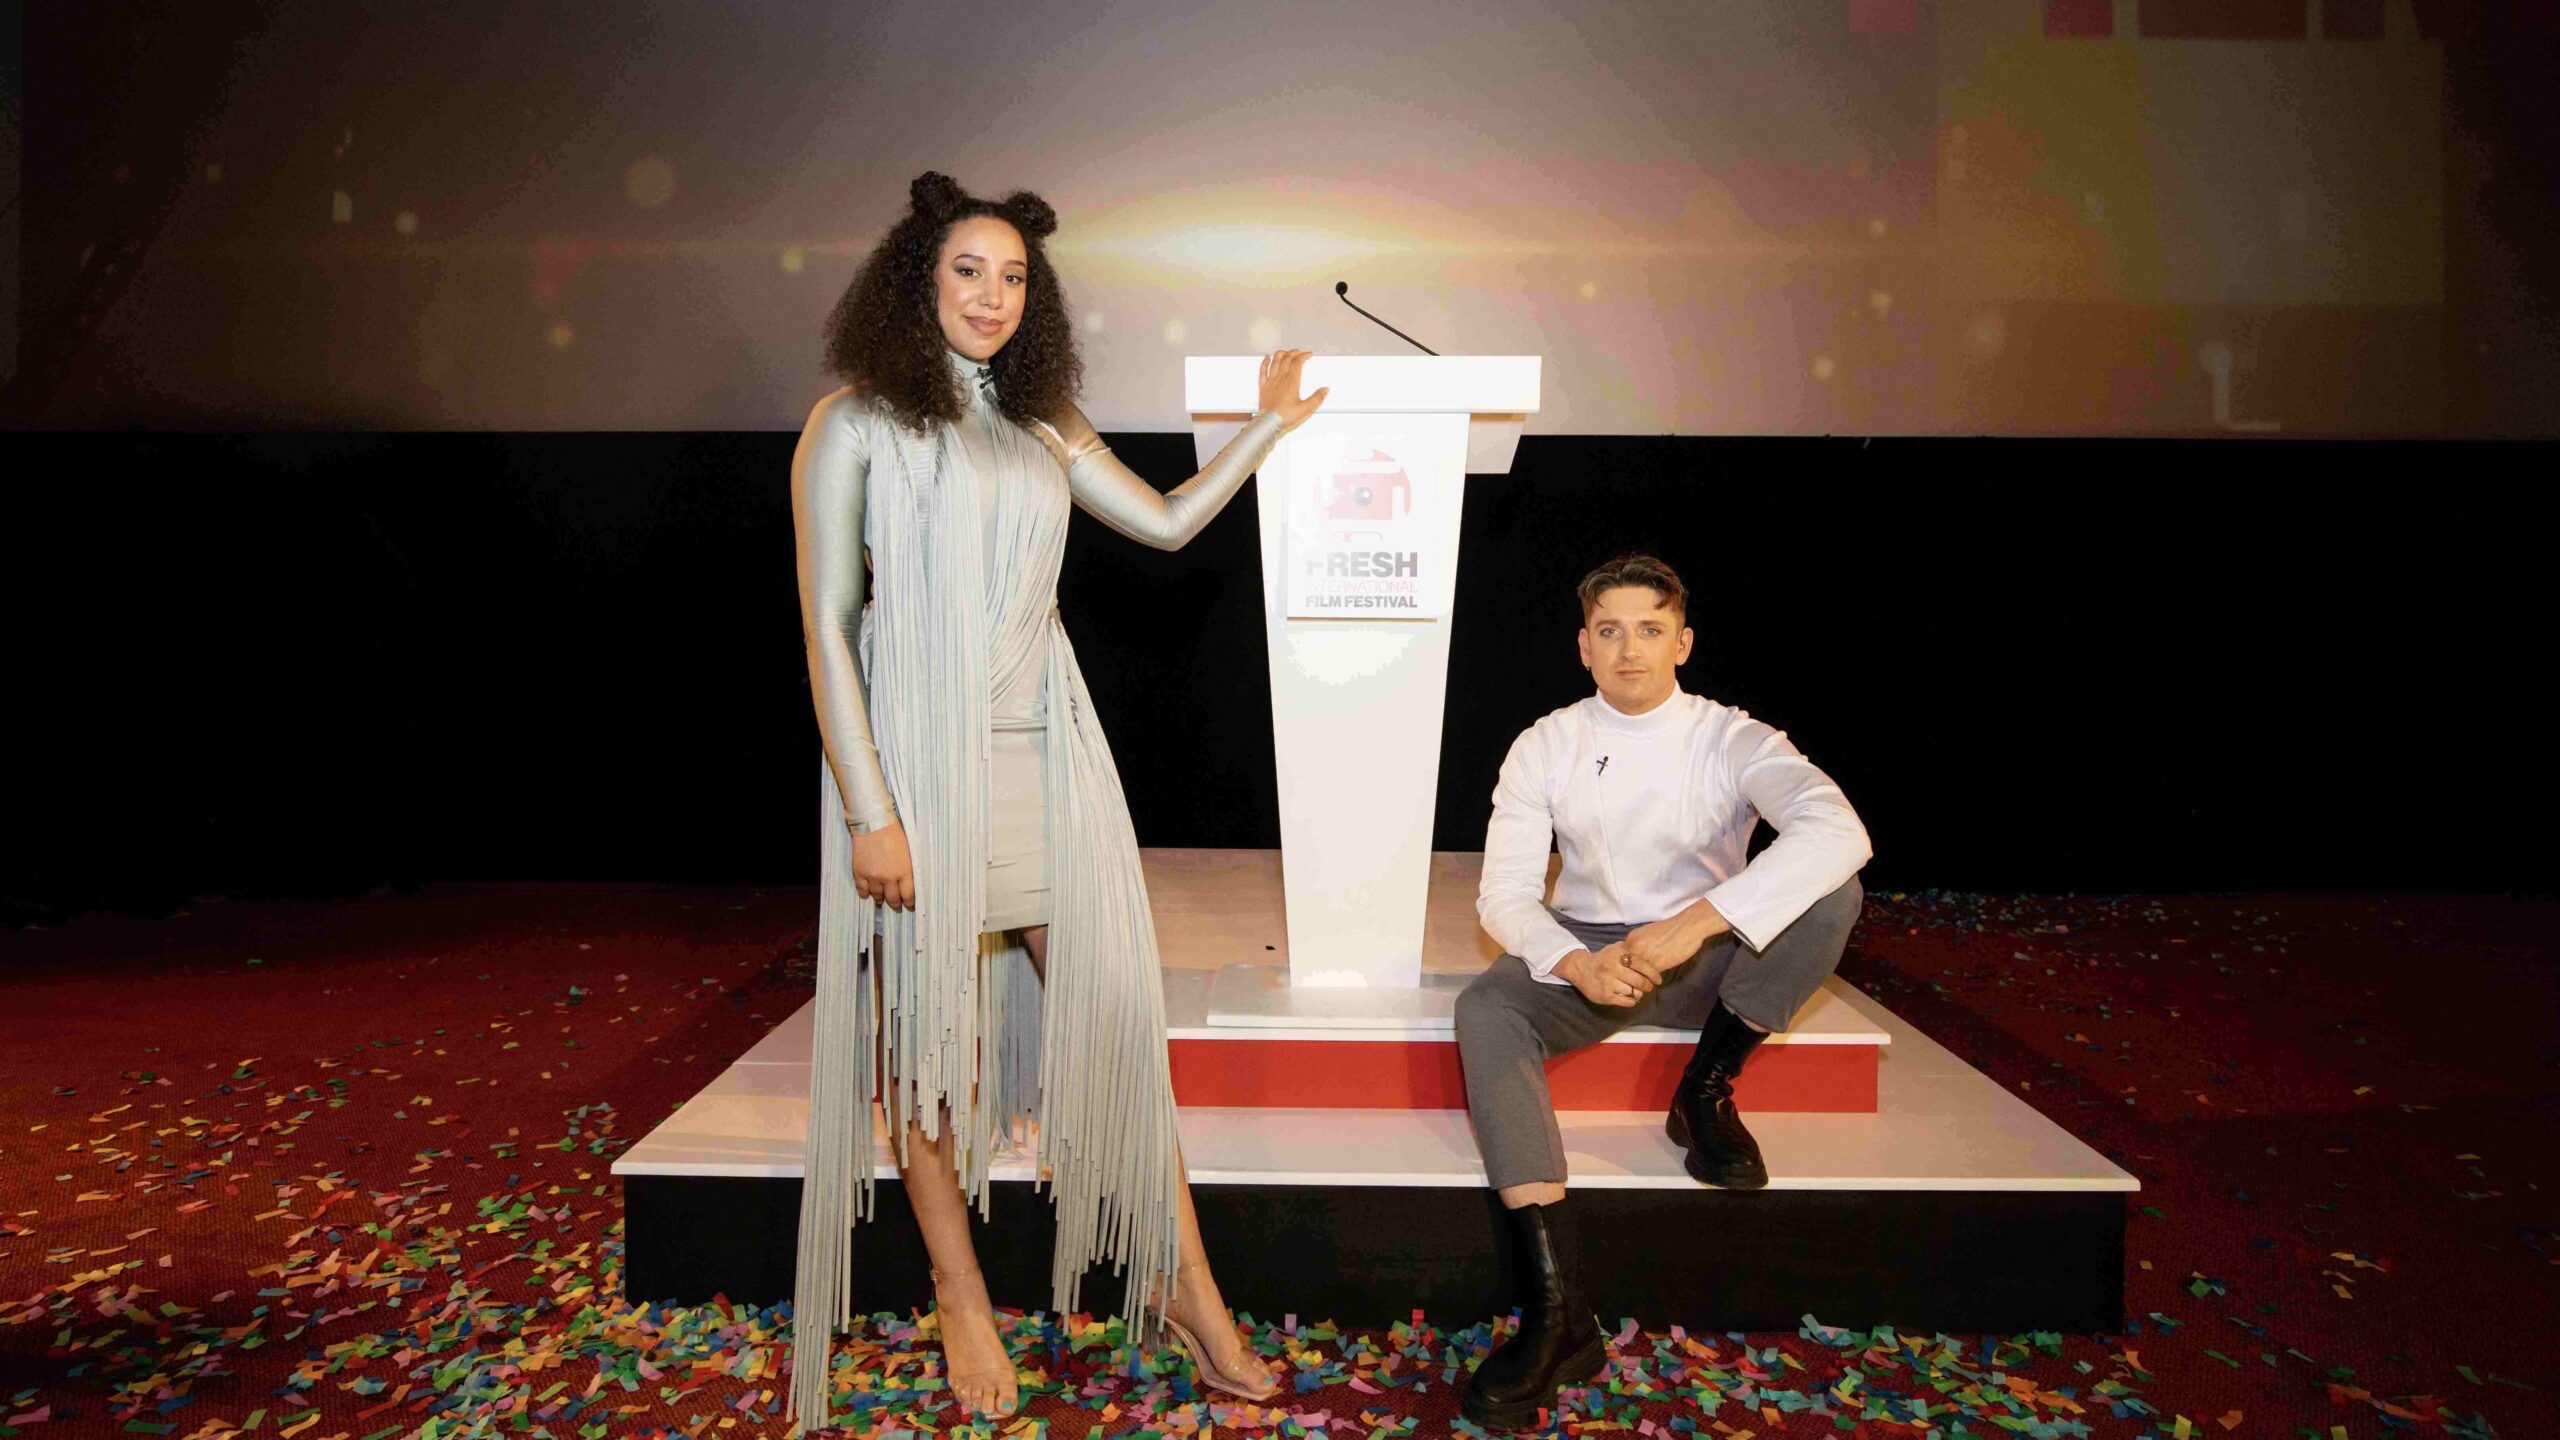 The 26th Annual Ireland's Young Filmmaker of the Year 2022, presented by Fresh International Film Festival, will air on RTÉ 2 television, April 14th at 7pm.